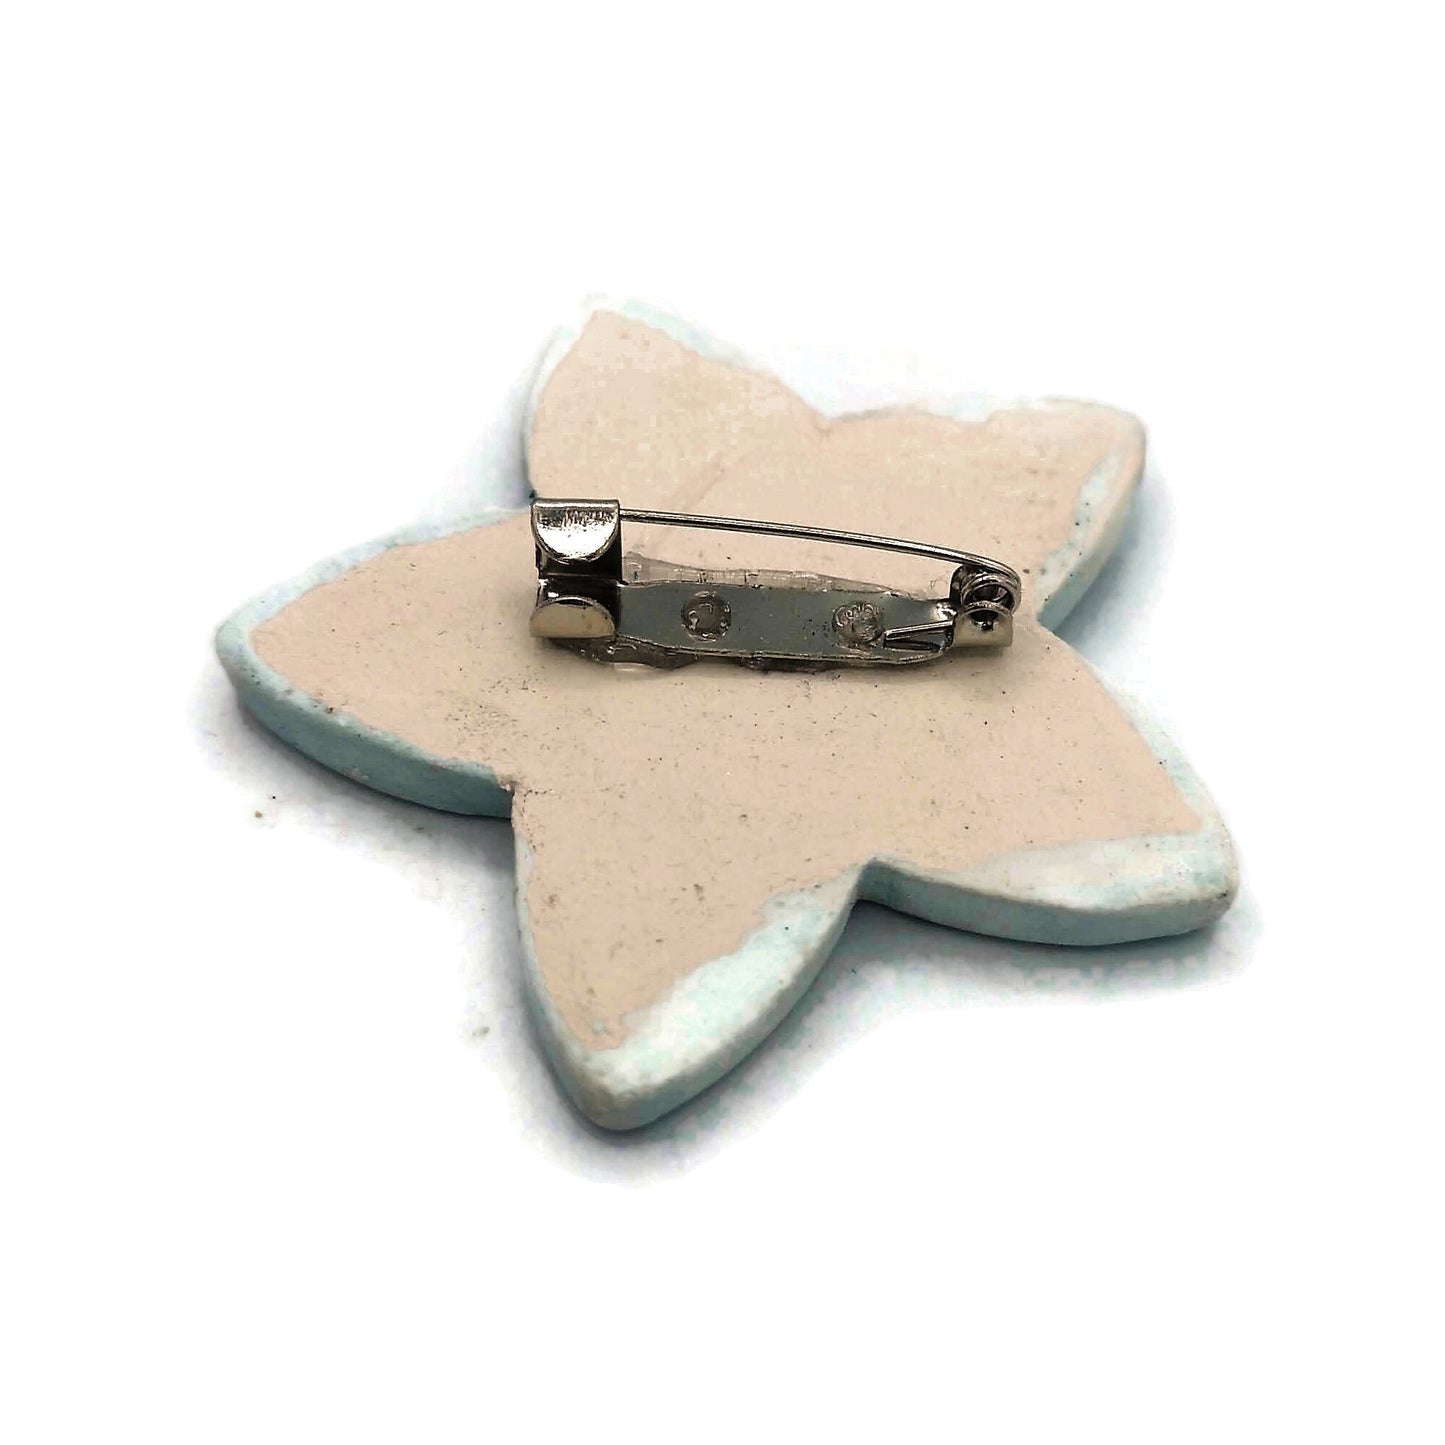 Star Brooch, Celestial Brooch, Ceramic Jewelry Mothers Day Gift For Grandma, Broach Pin Mom Birthday Gift From Daughter - Ceramica Ana Rafael